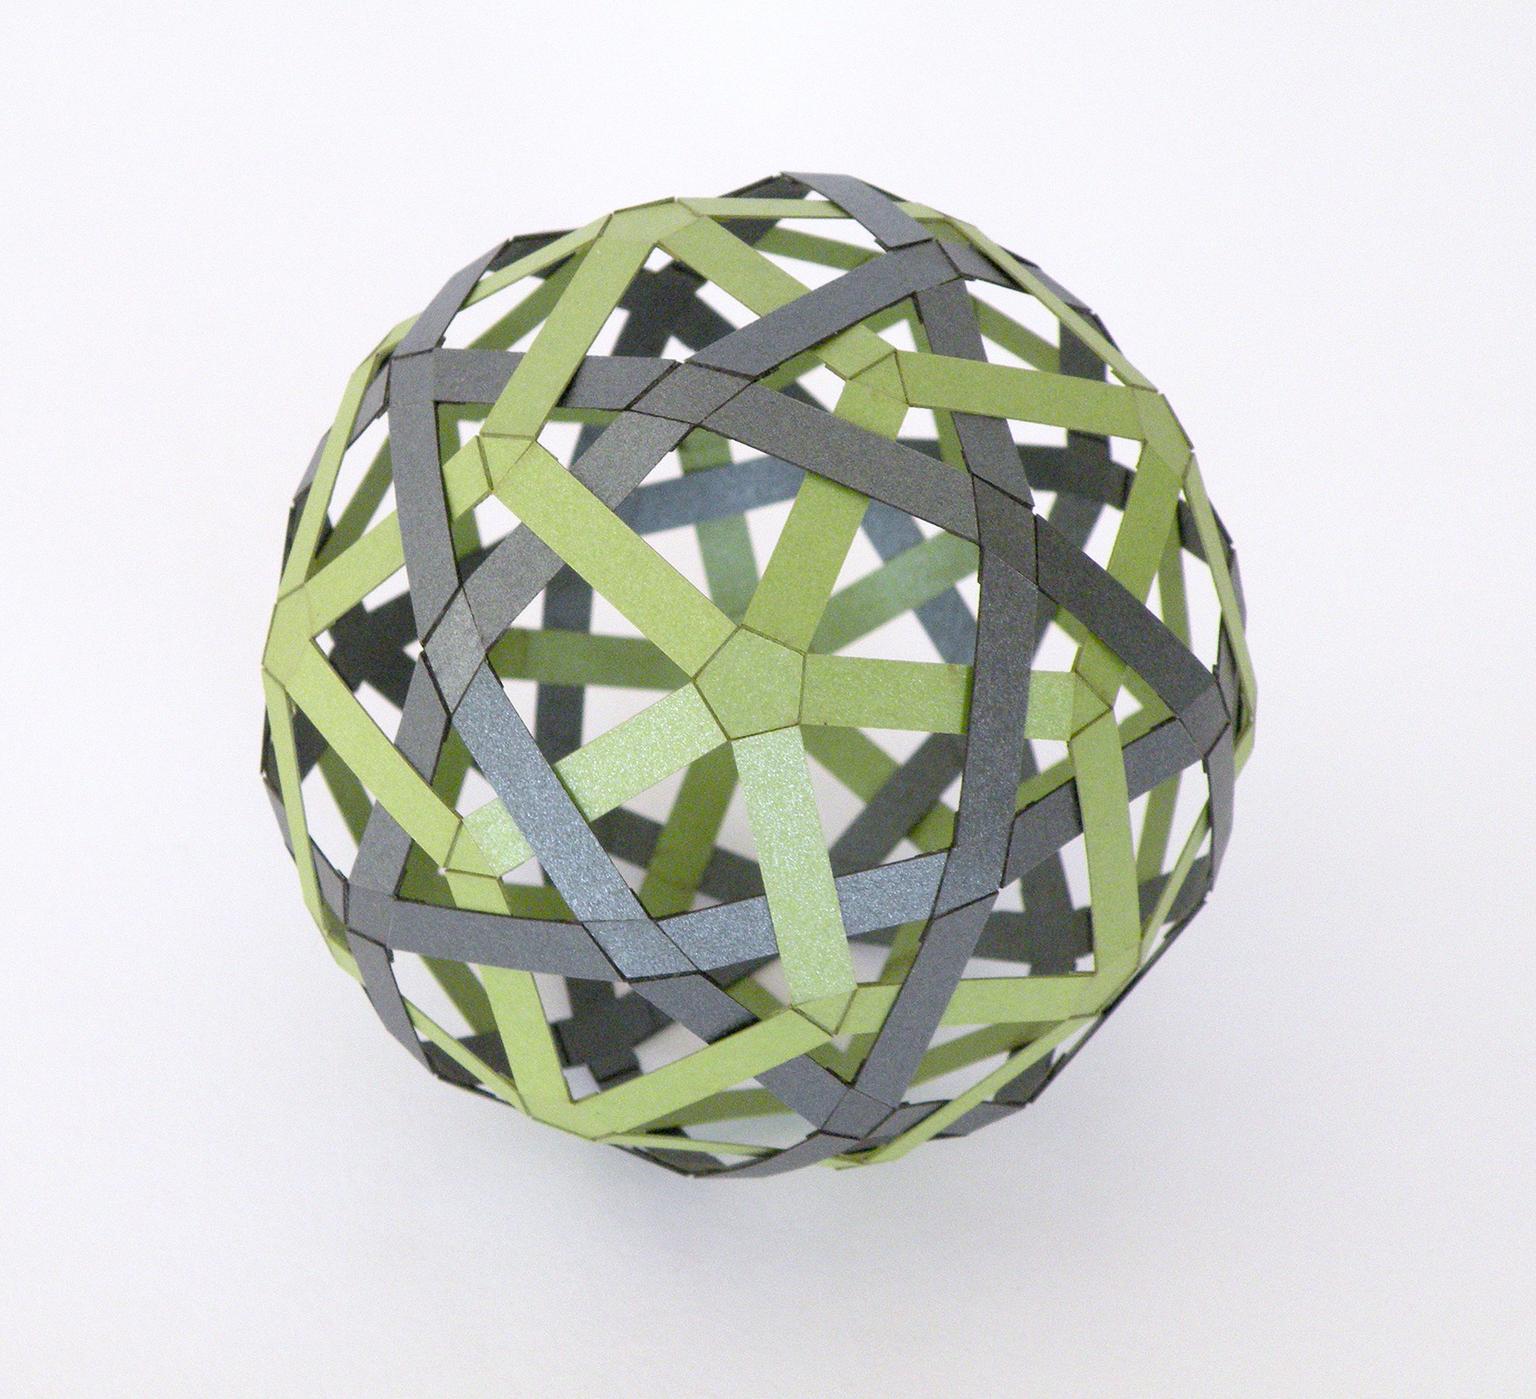 Image for entry 'Woven Duals: Charcoal Icosidodecahedron & Green Rhombic Triacontahedron'